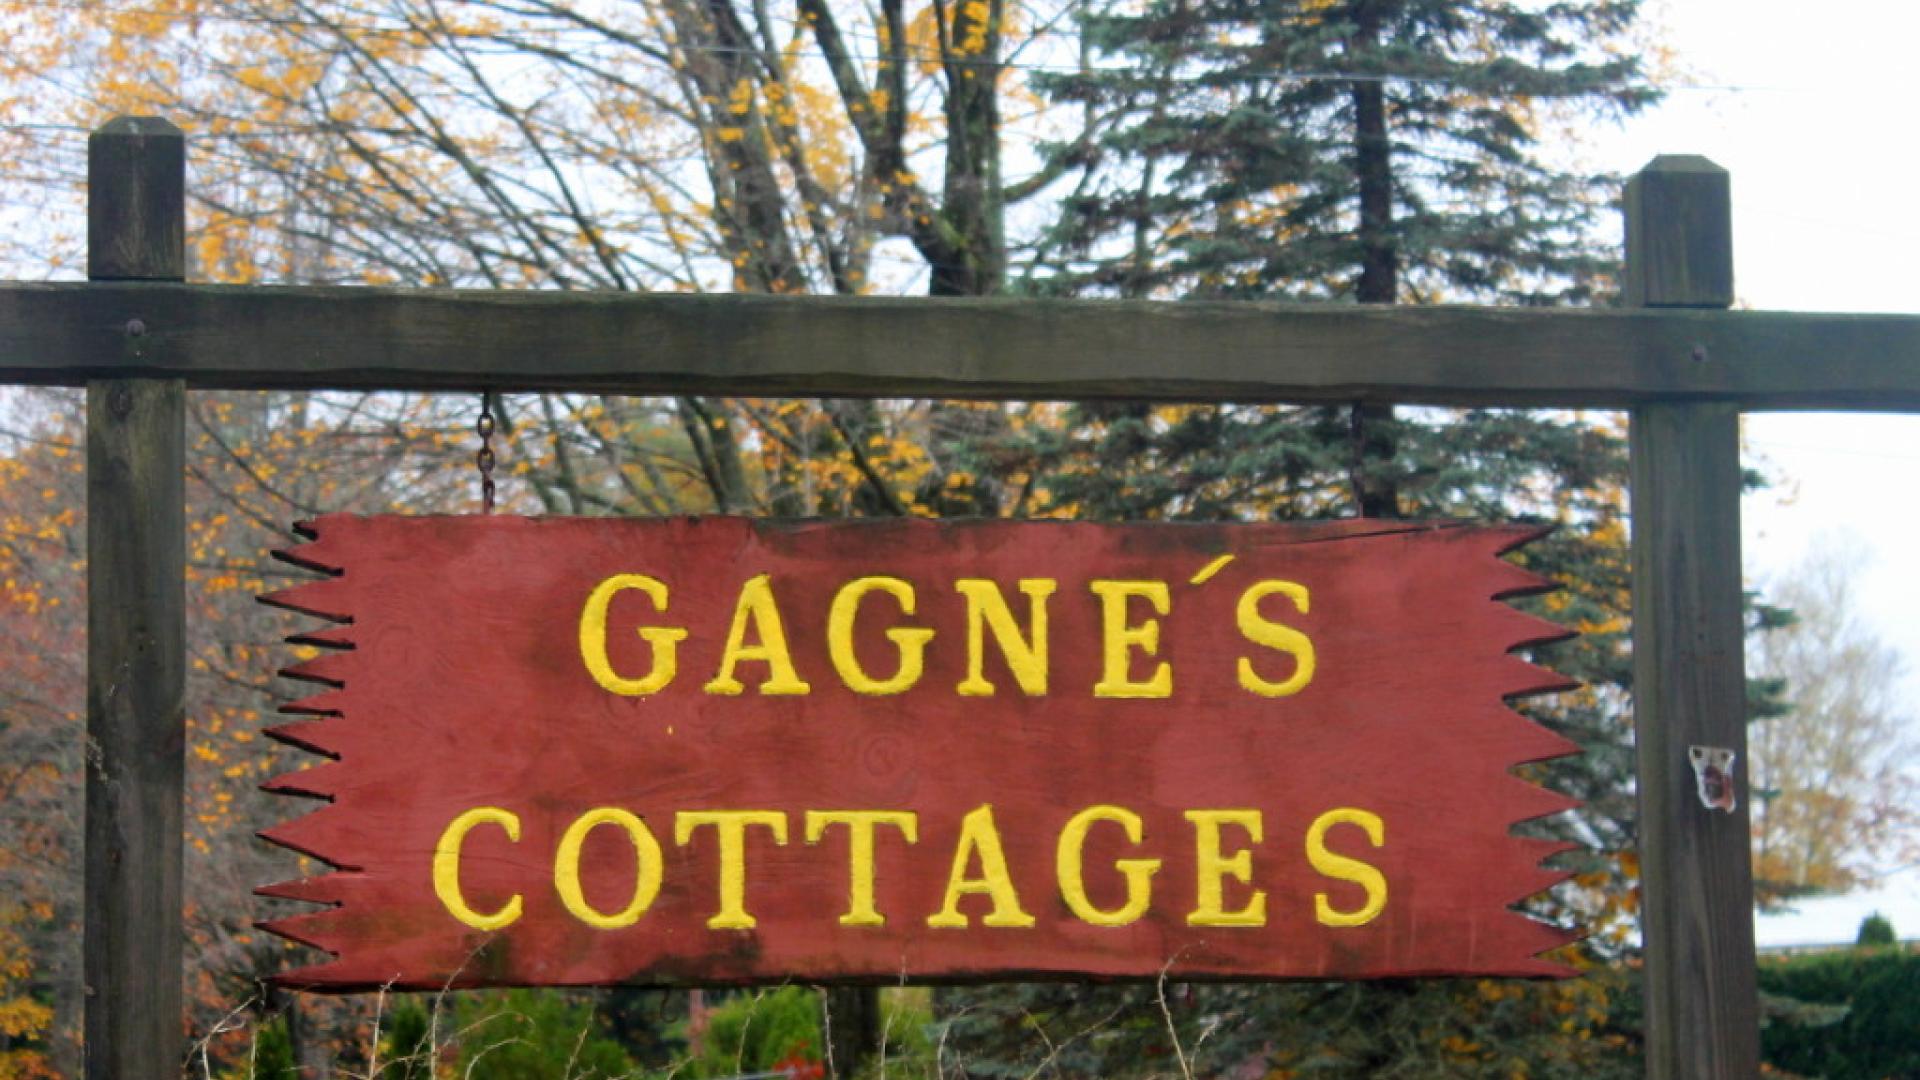 Gagne's Housekeeping Cottages